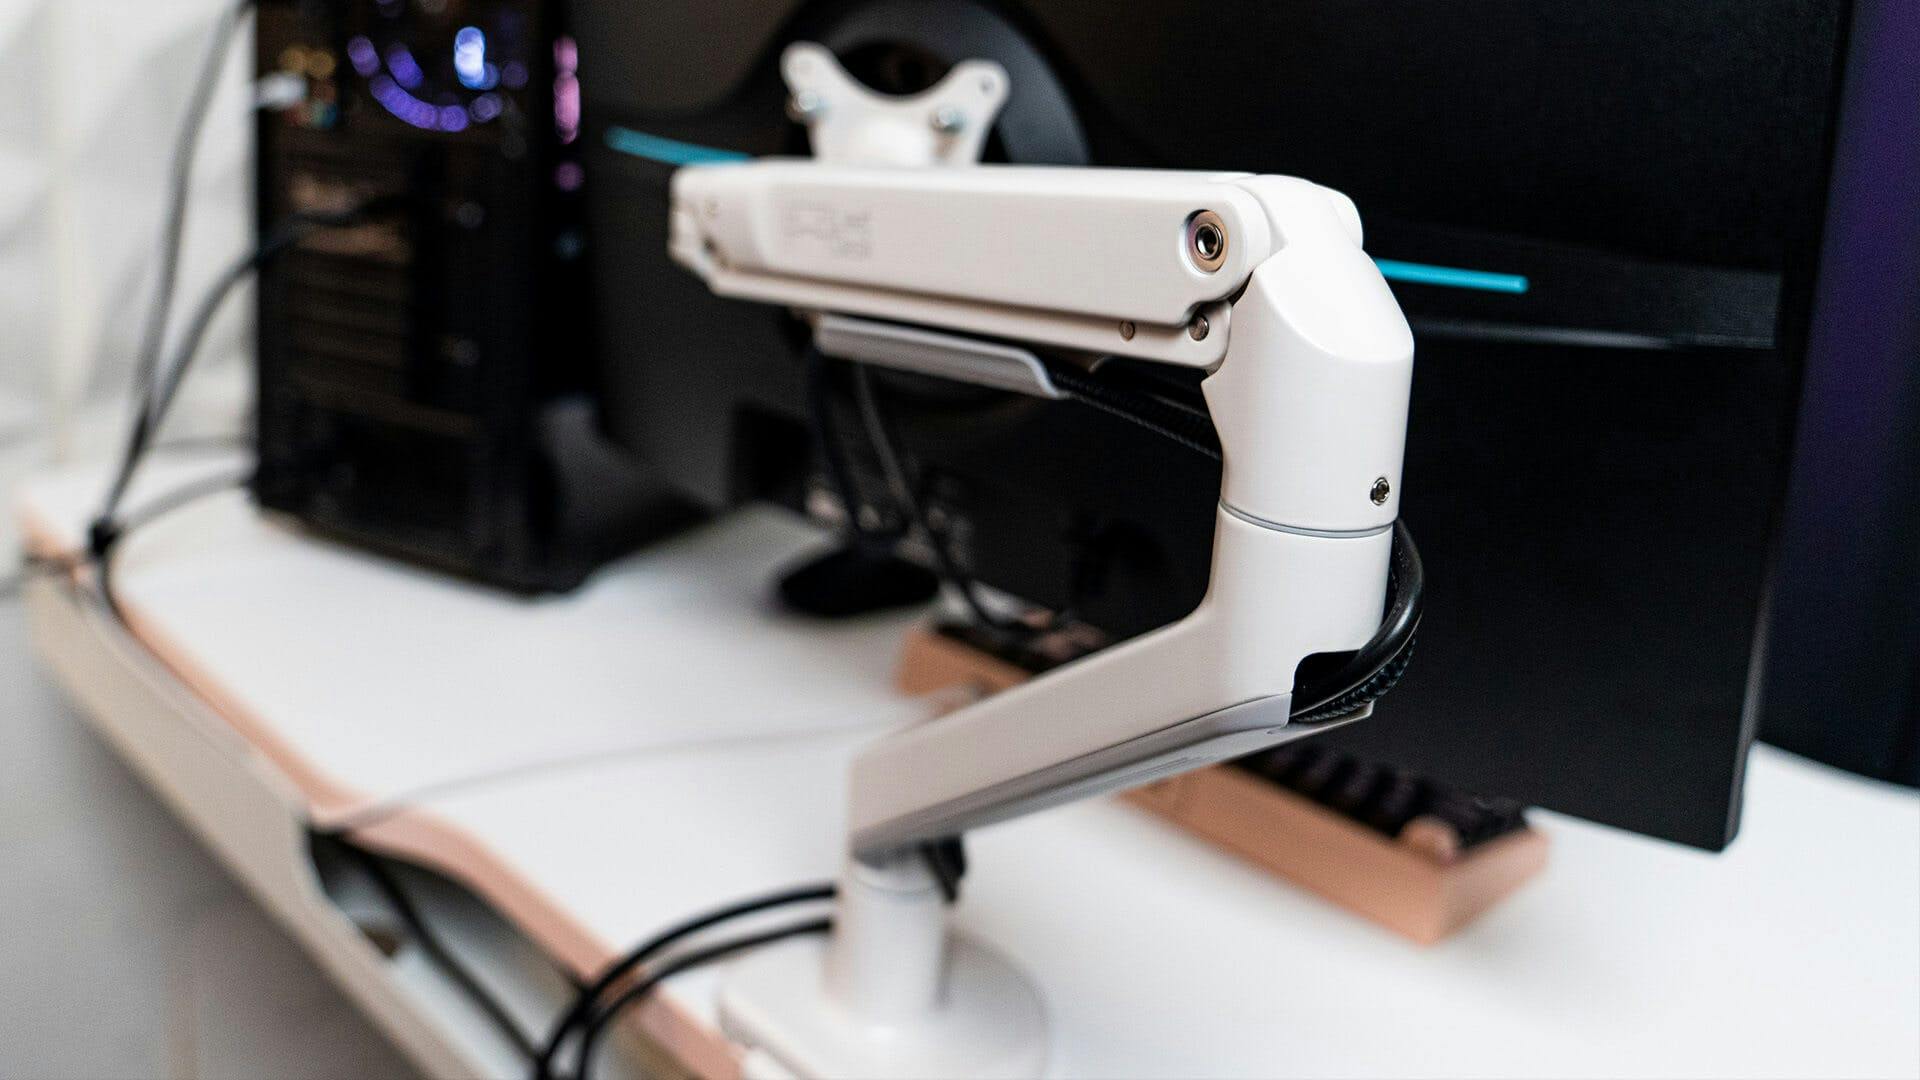 Top 5 Cable Management Products for Your Gaming Desk 